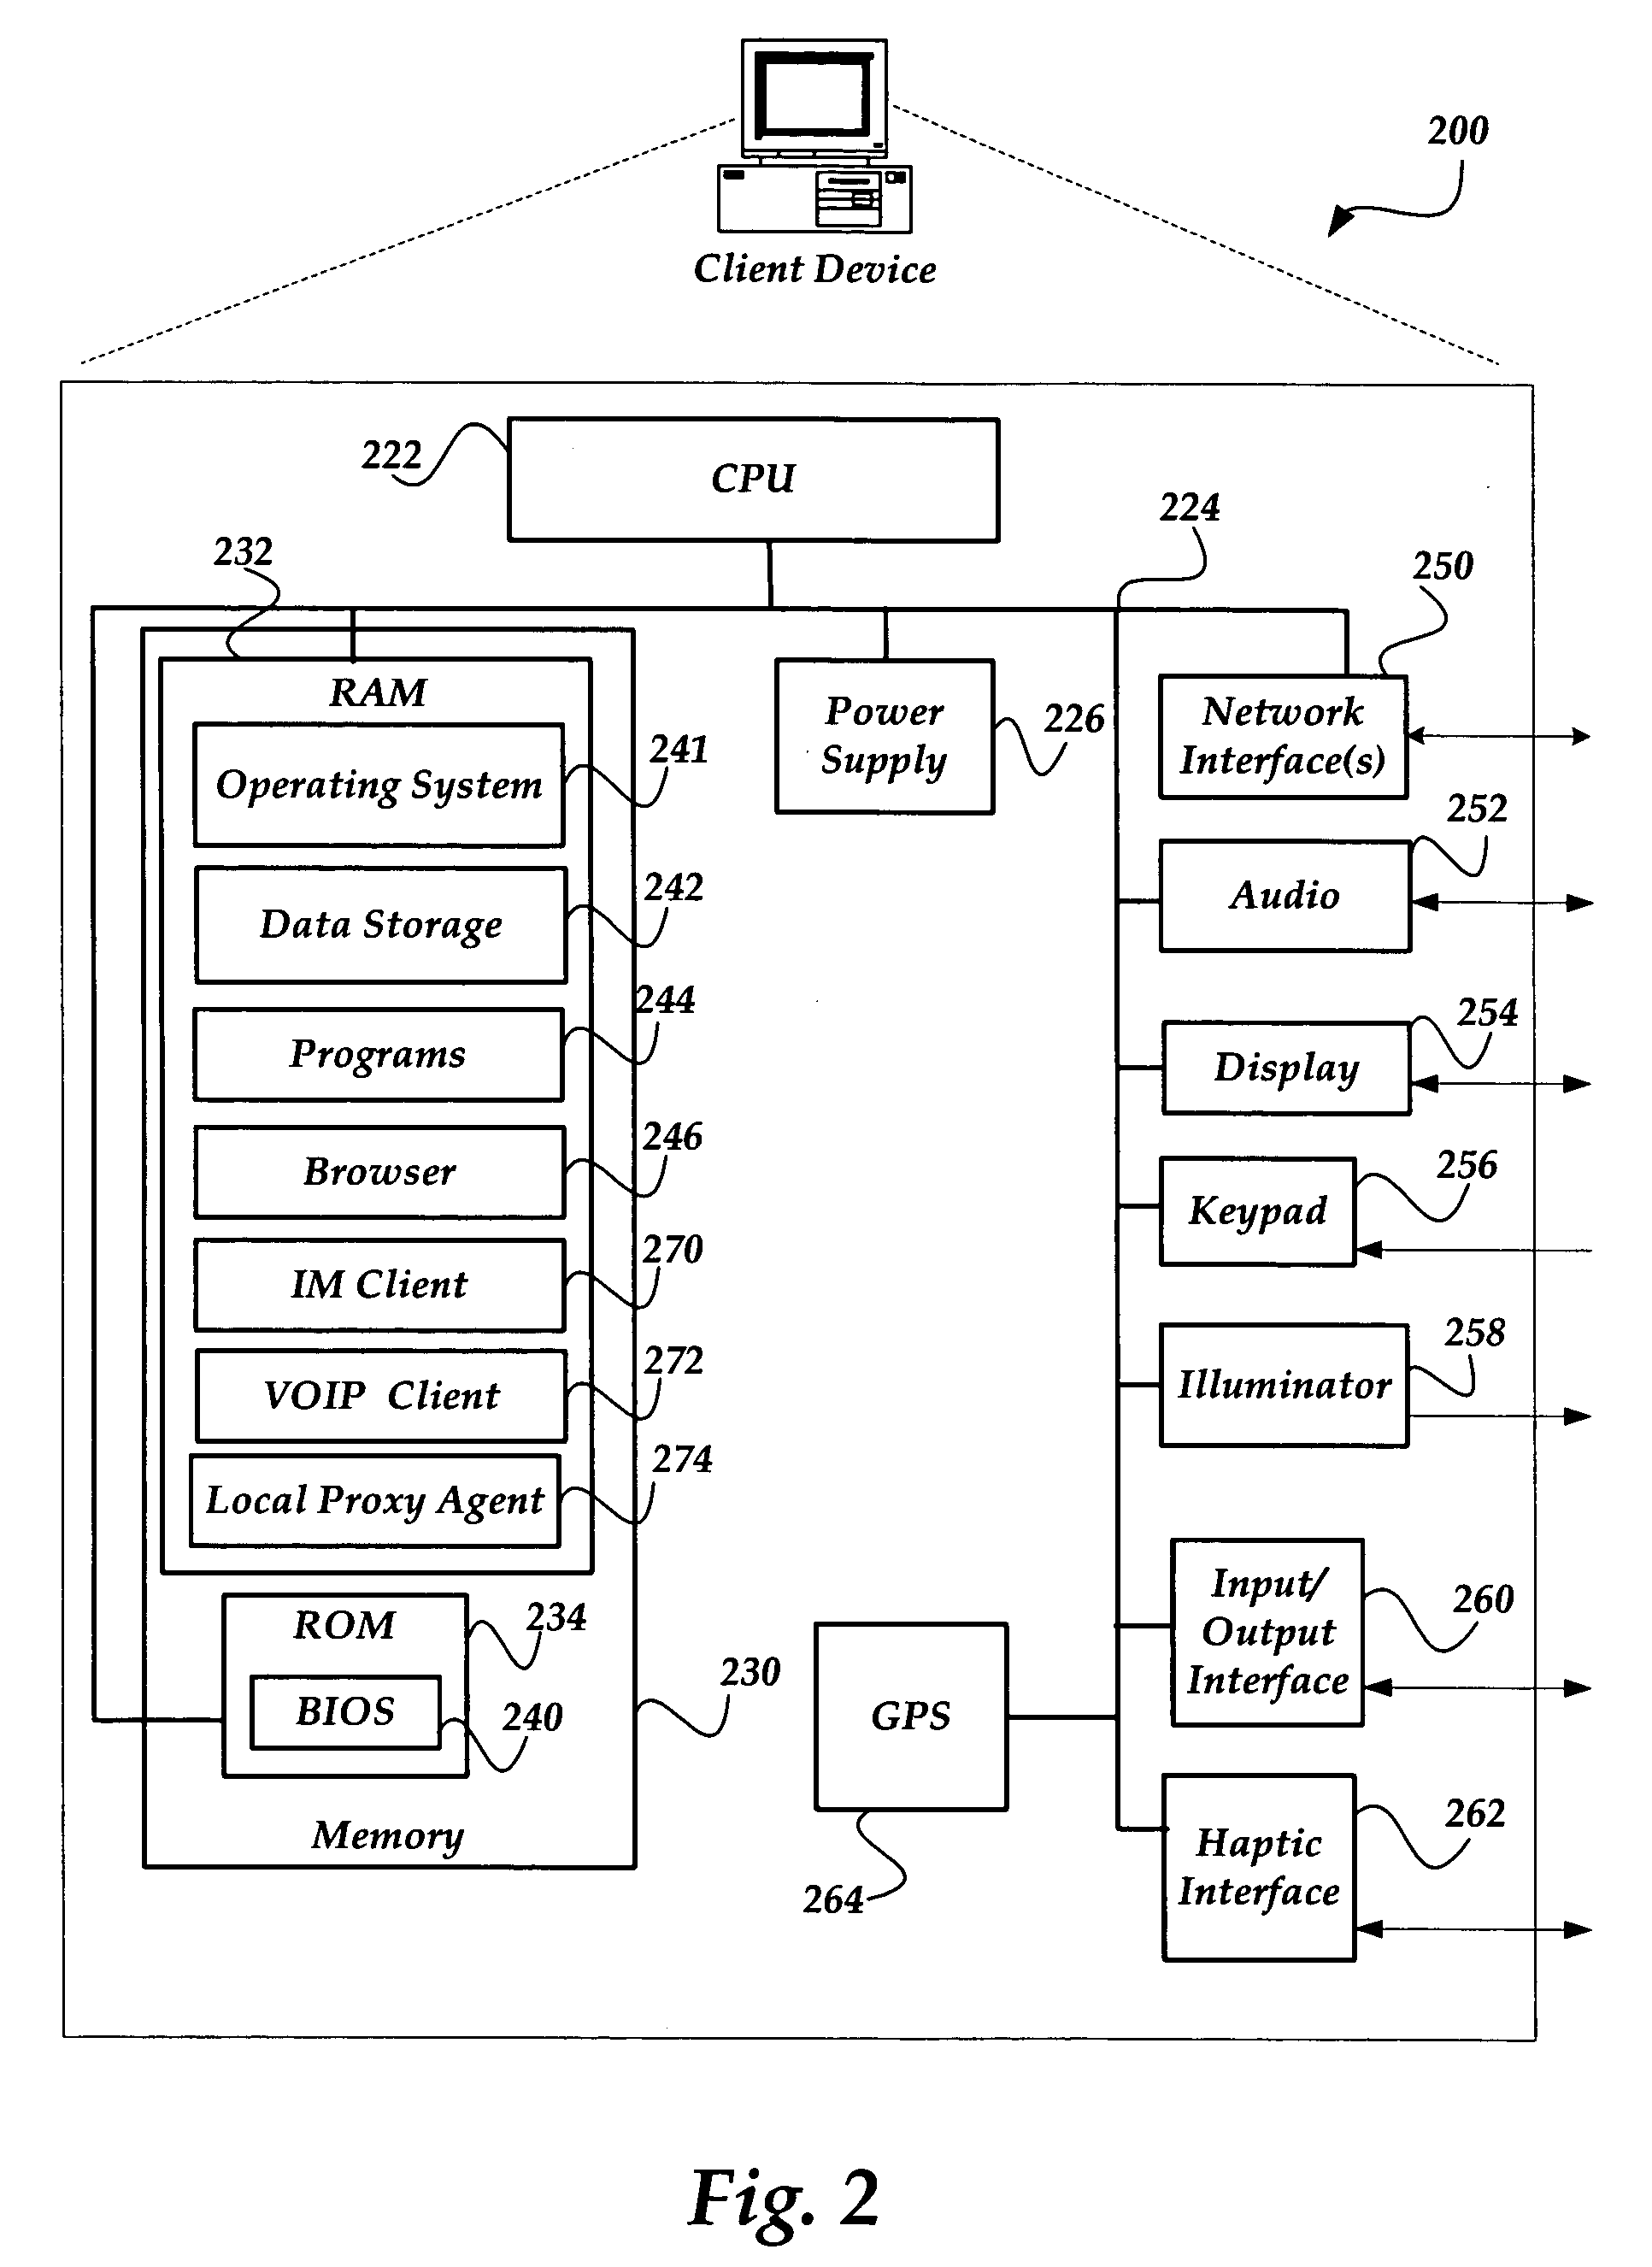 Dynamically selecting codecs for managing an audio message